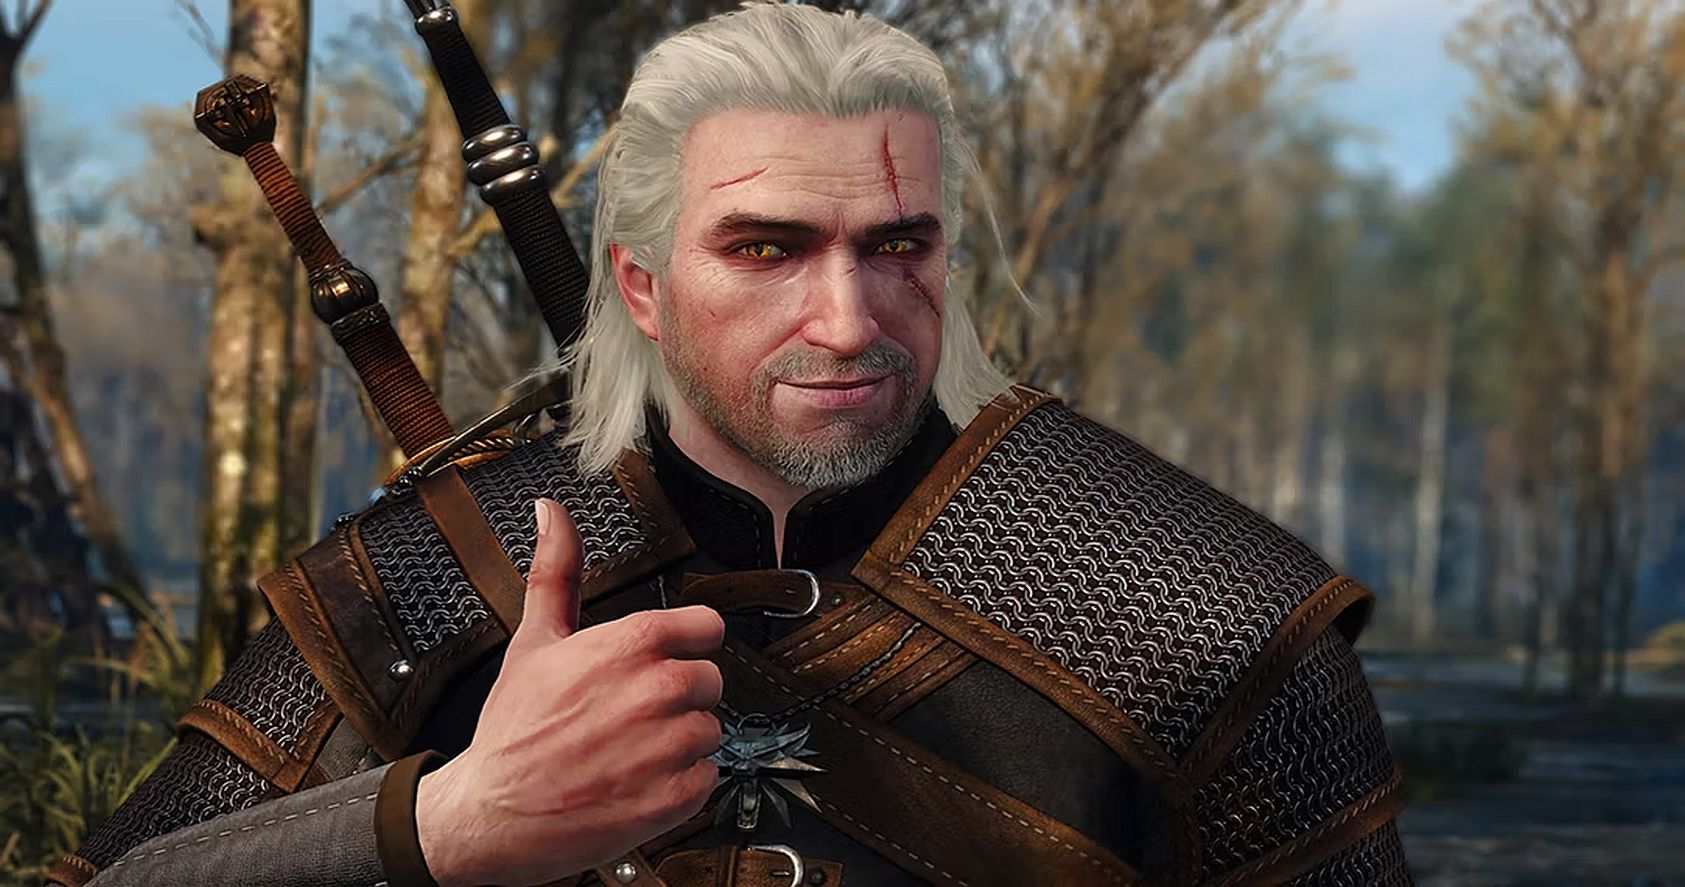 Image for The Witcher 3's next-gen update features detailed and 'unintended' female genitalia